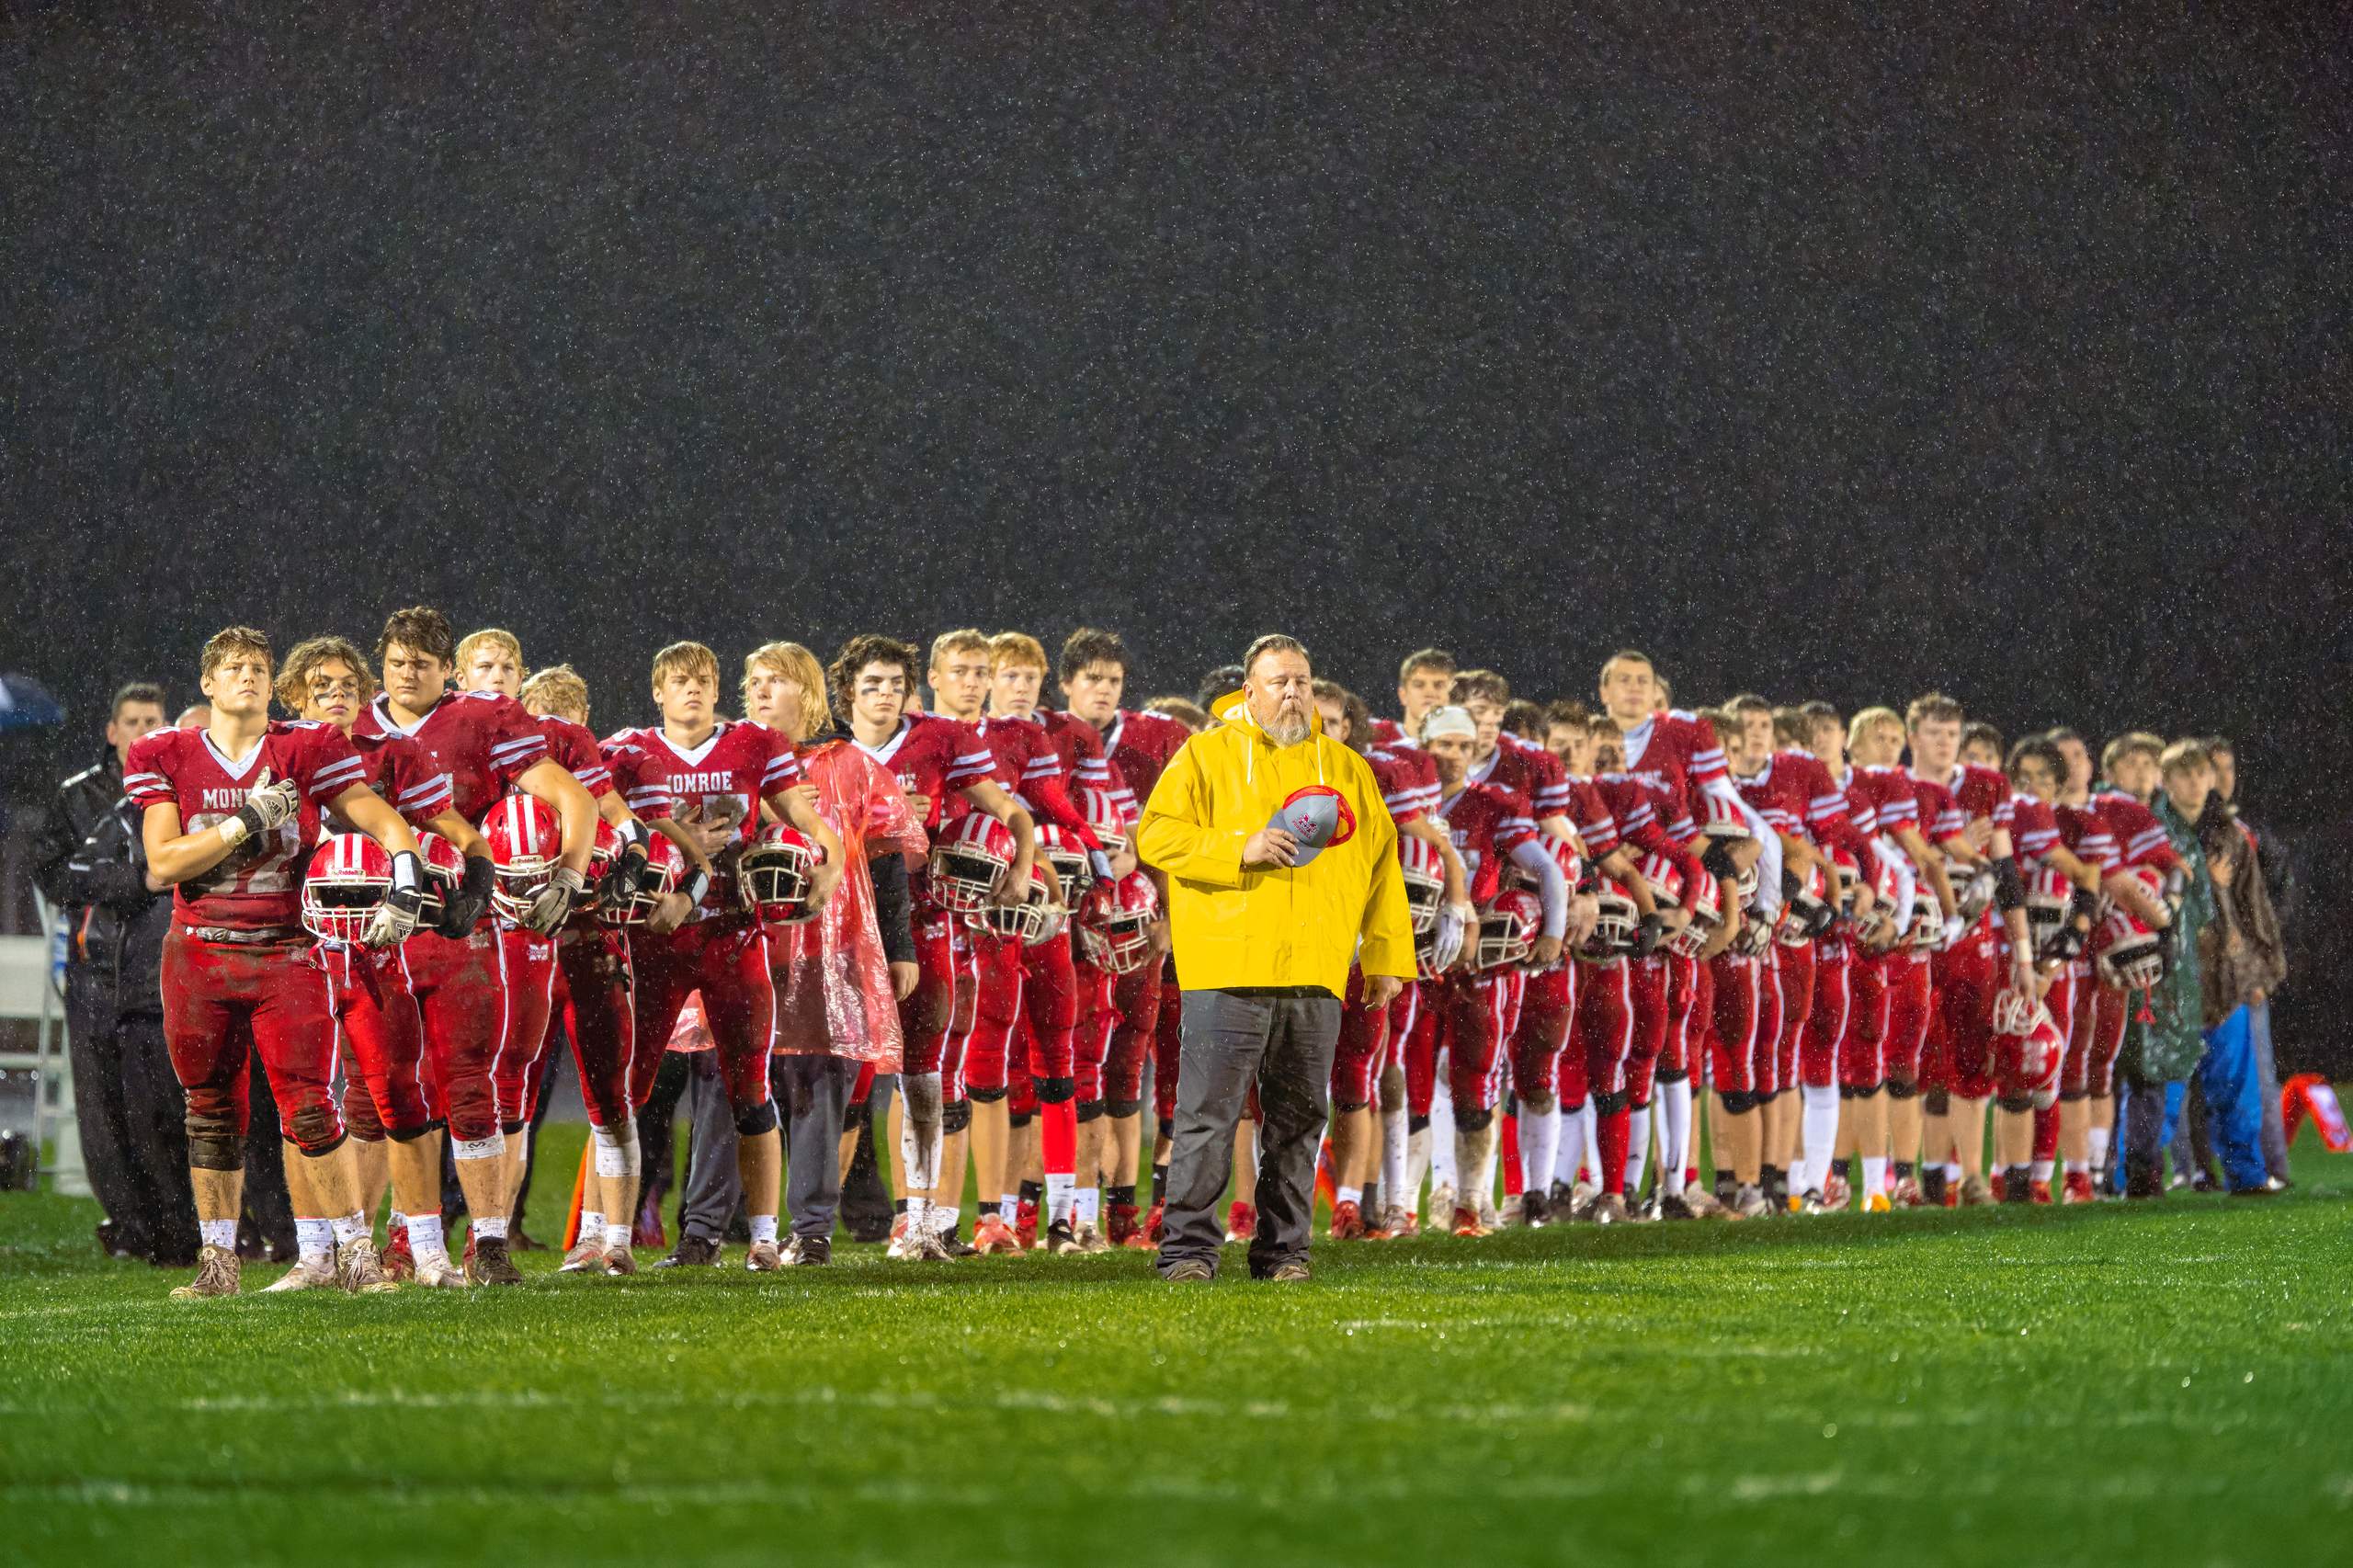 Monroe vs. West Bend East, Round 3 of the 2022 WIAA Playoffs, photography by Ross Harried for Second Crop Sports